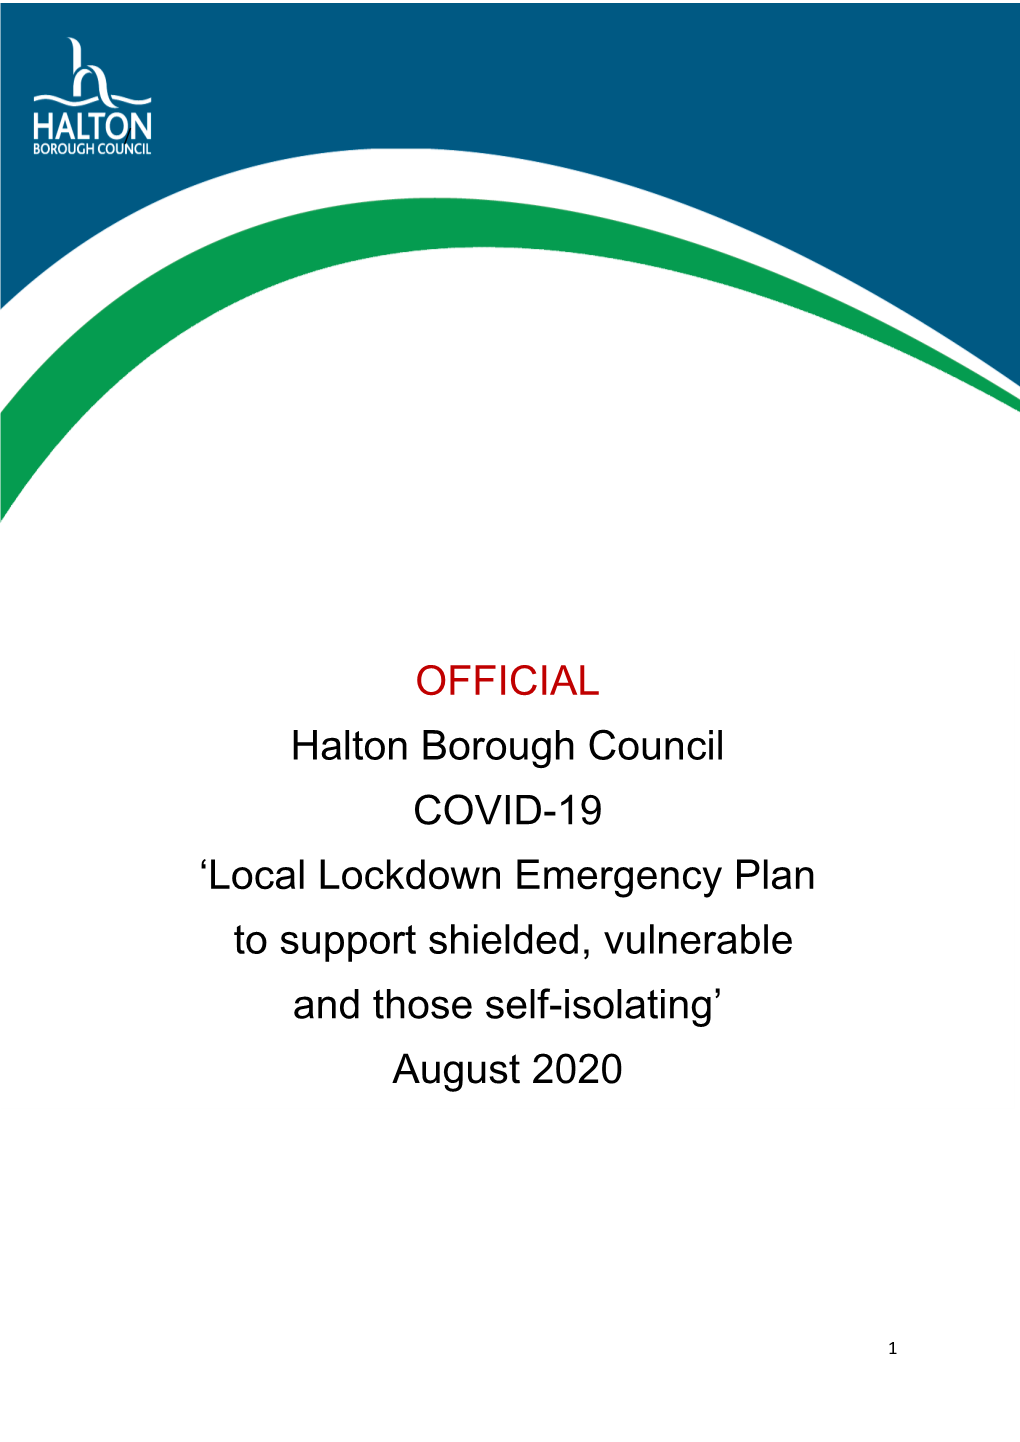 OFFICIAL Halton Borough Council COVID-19 ‘Local Lockdown Emergency Plan to Support Shielded, Vulnerable and Those Self-Isolating’ August 2020